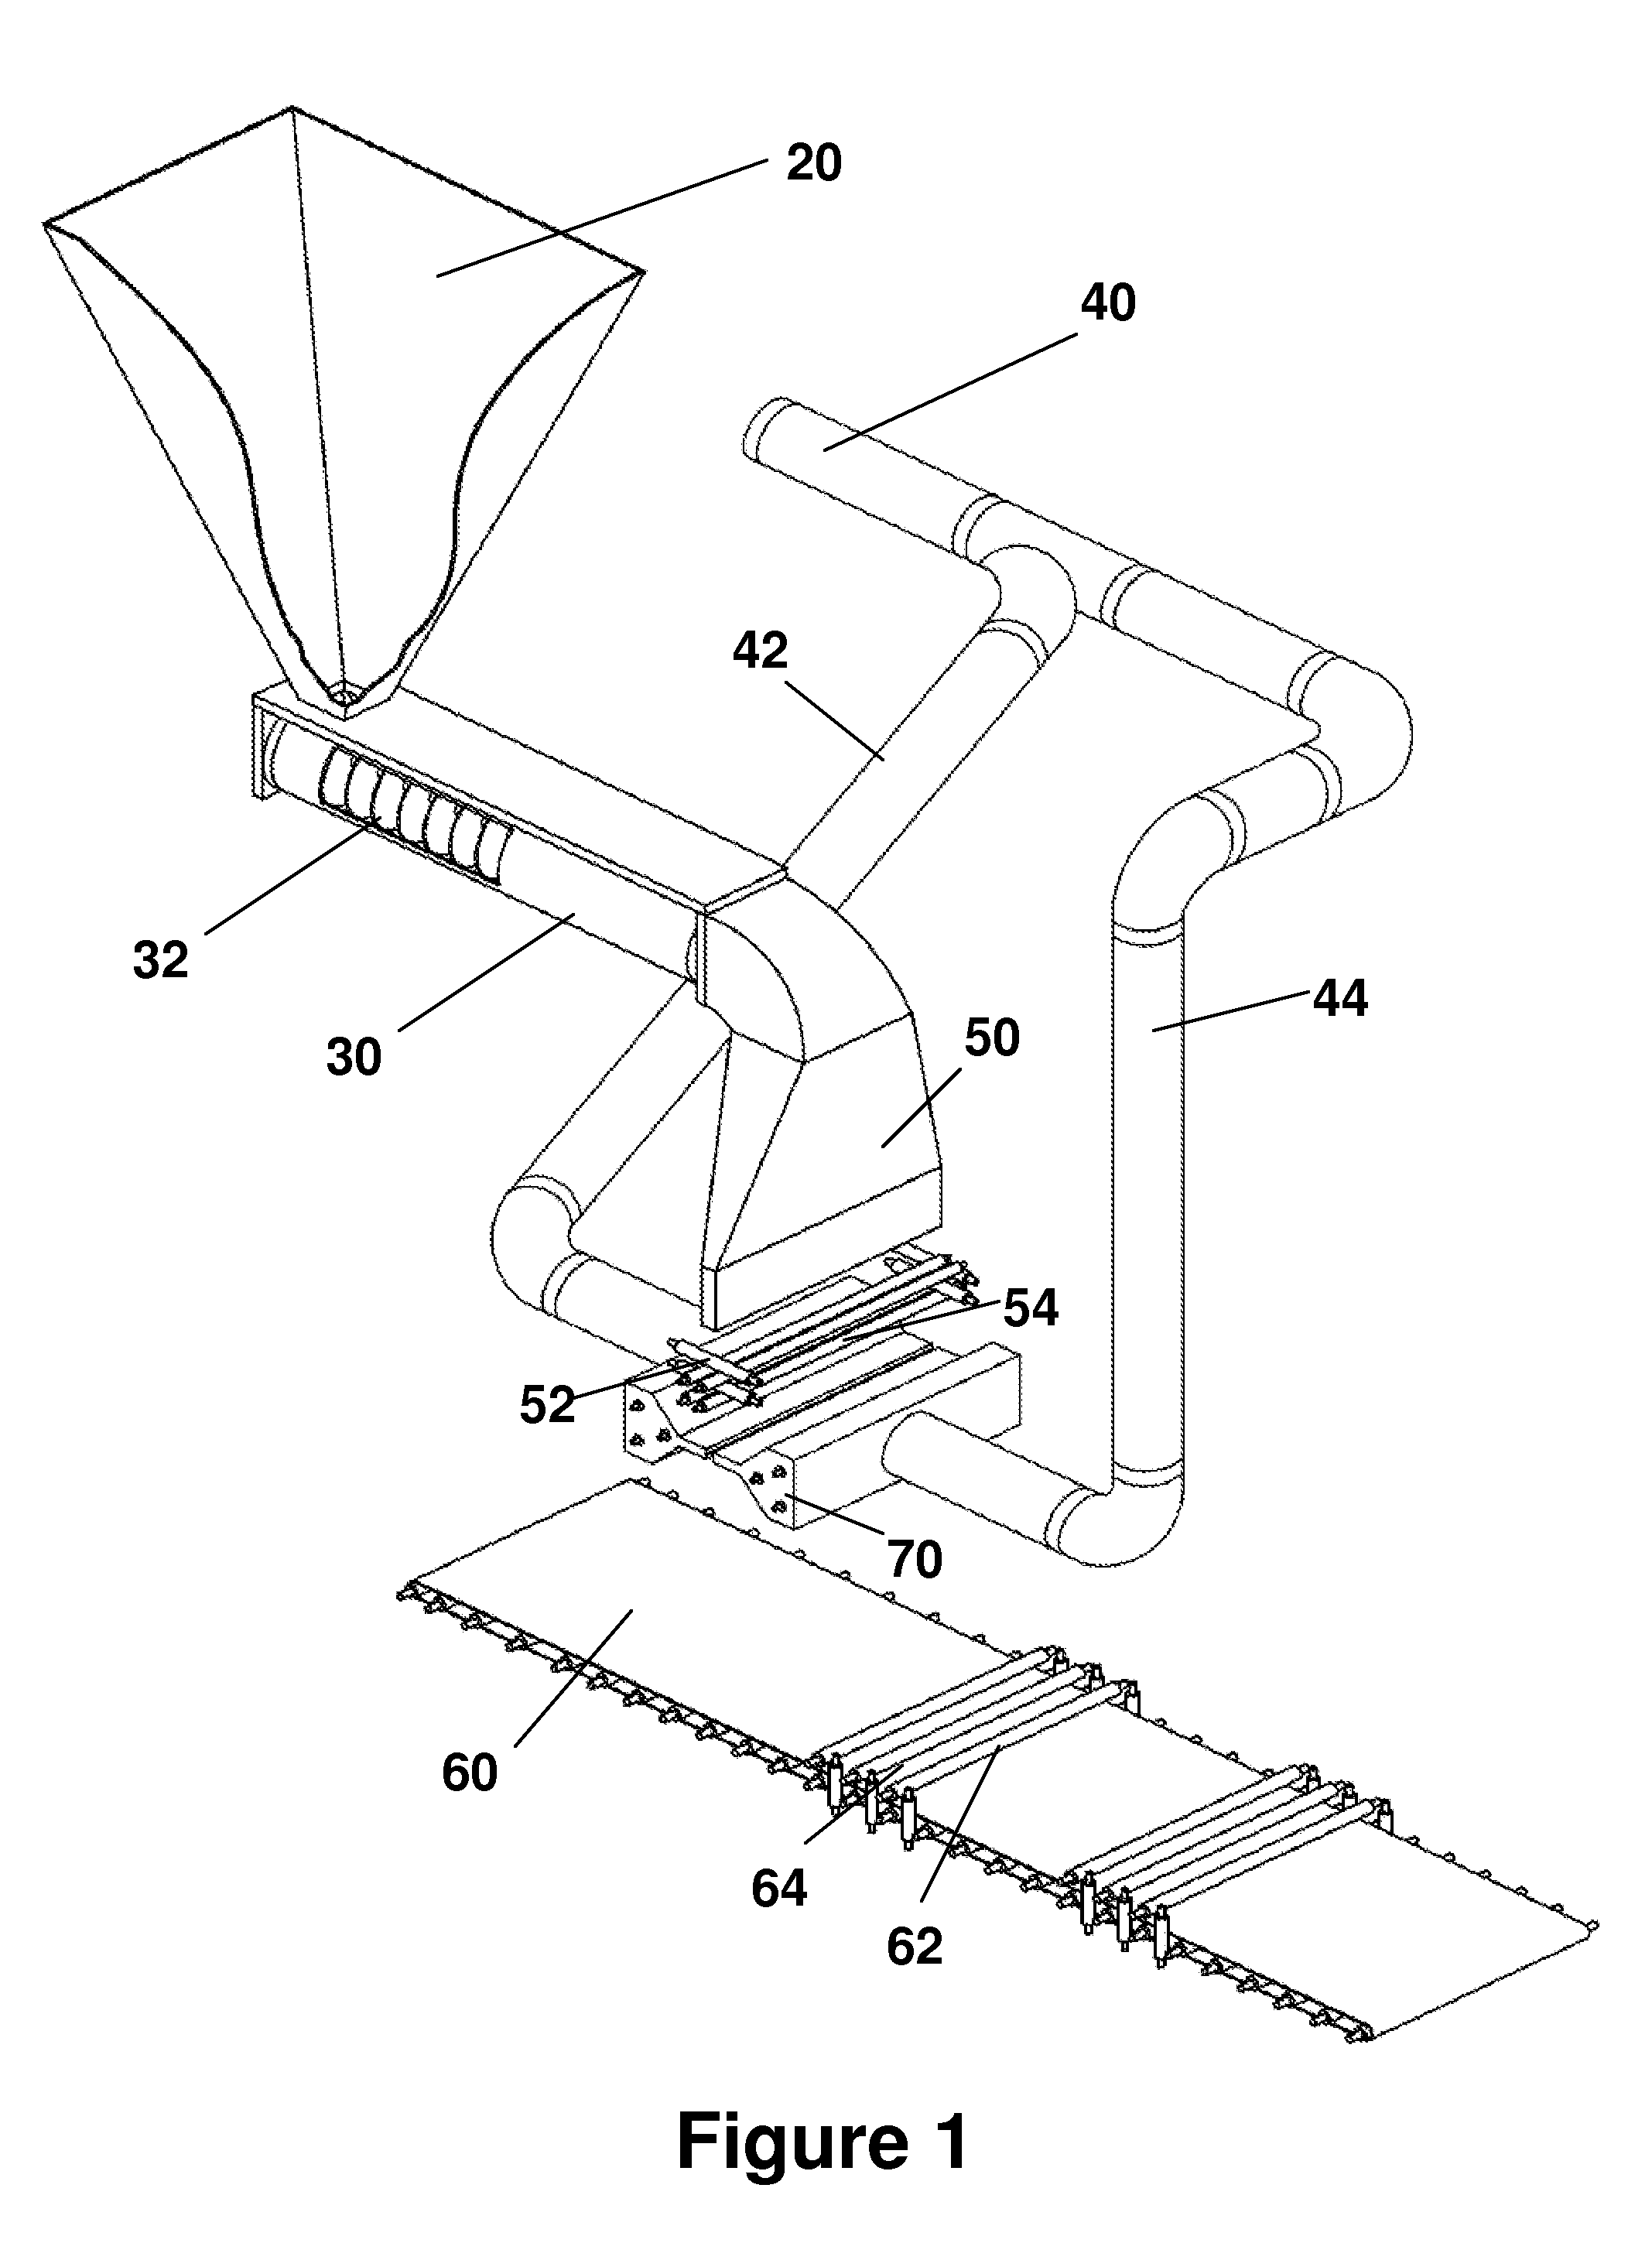 Extruded Cross-Banded Magnesium Oxide Construction Board and Method of Making Same